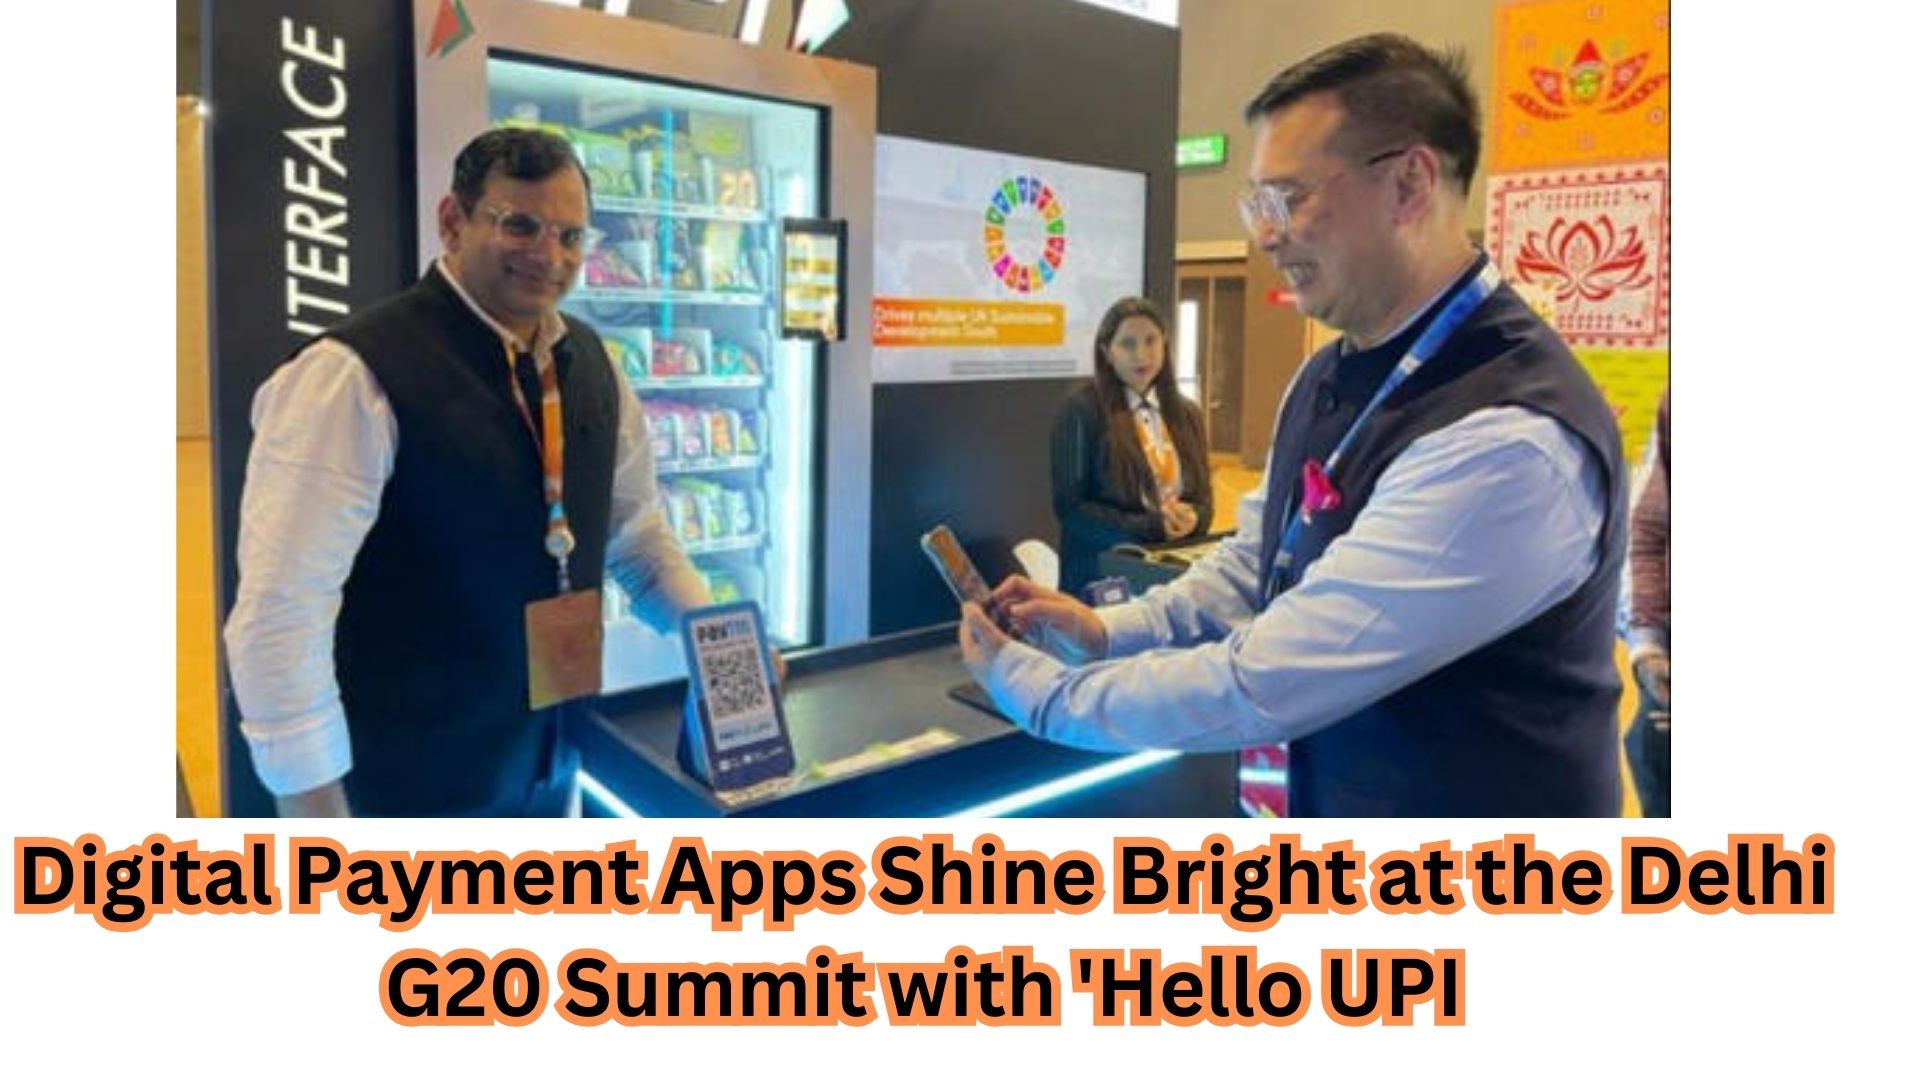 Digital Payment Apps Shine Bright at the Delhi G20 Summit with 'Hello UPI